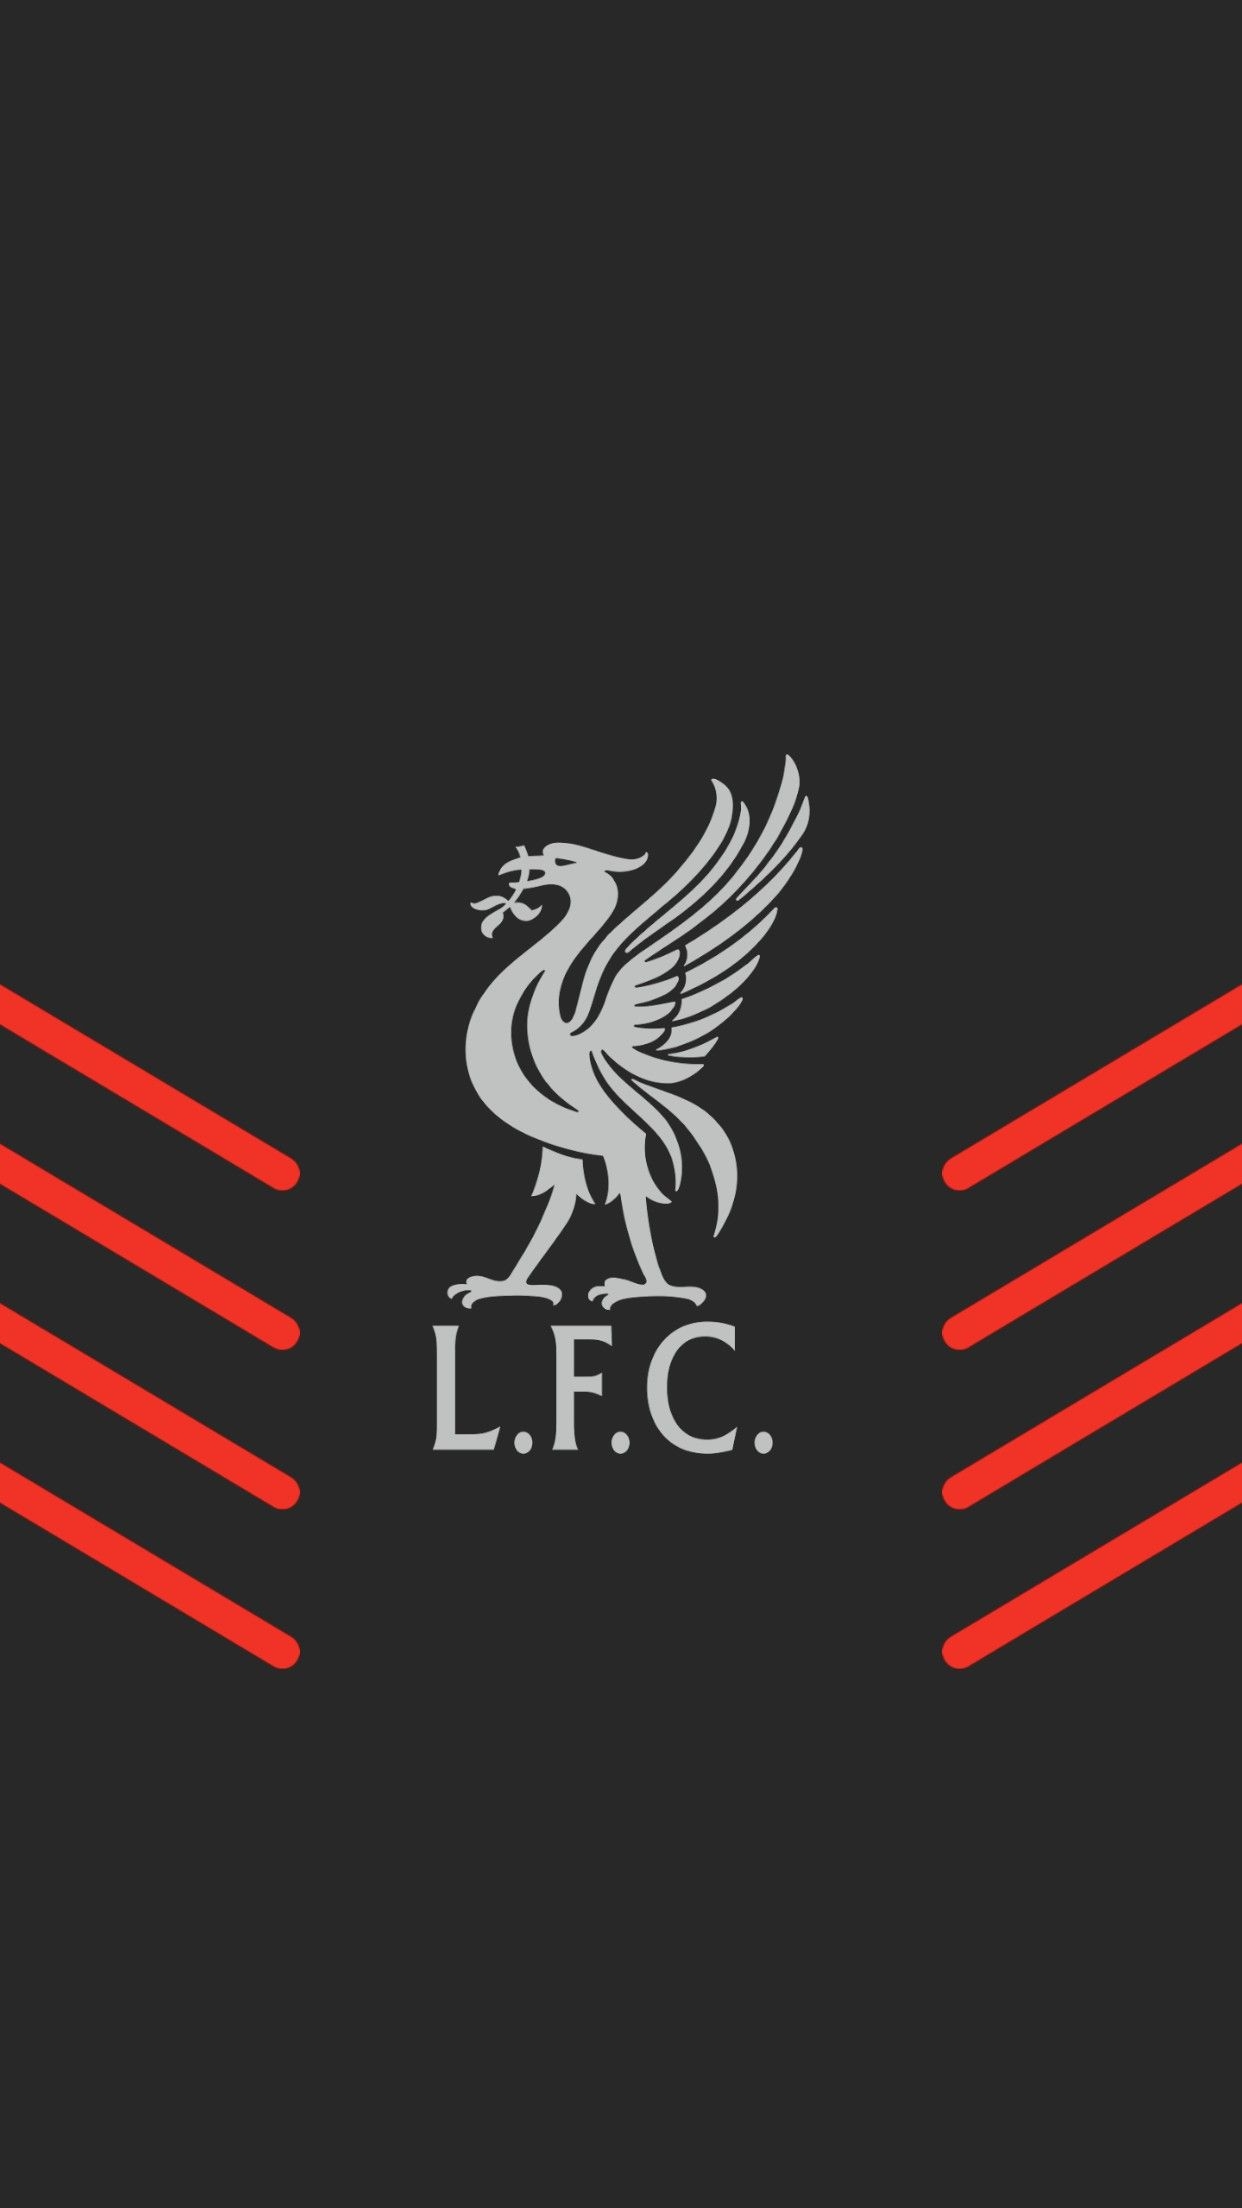 Liverpool Fc Wallpaper For Android - Liverpool Wallpaper Iphone - HD Wallpaper 